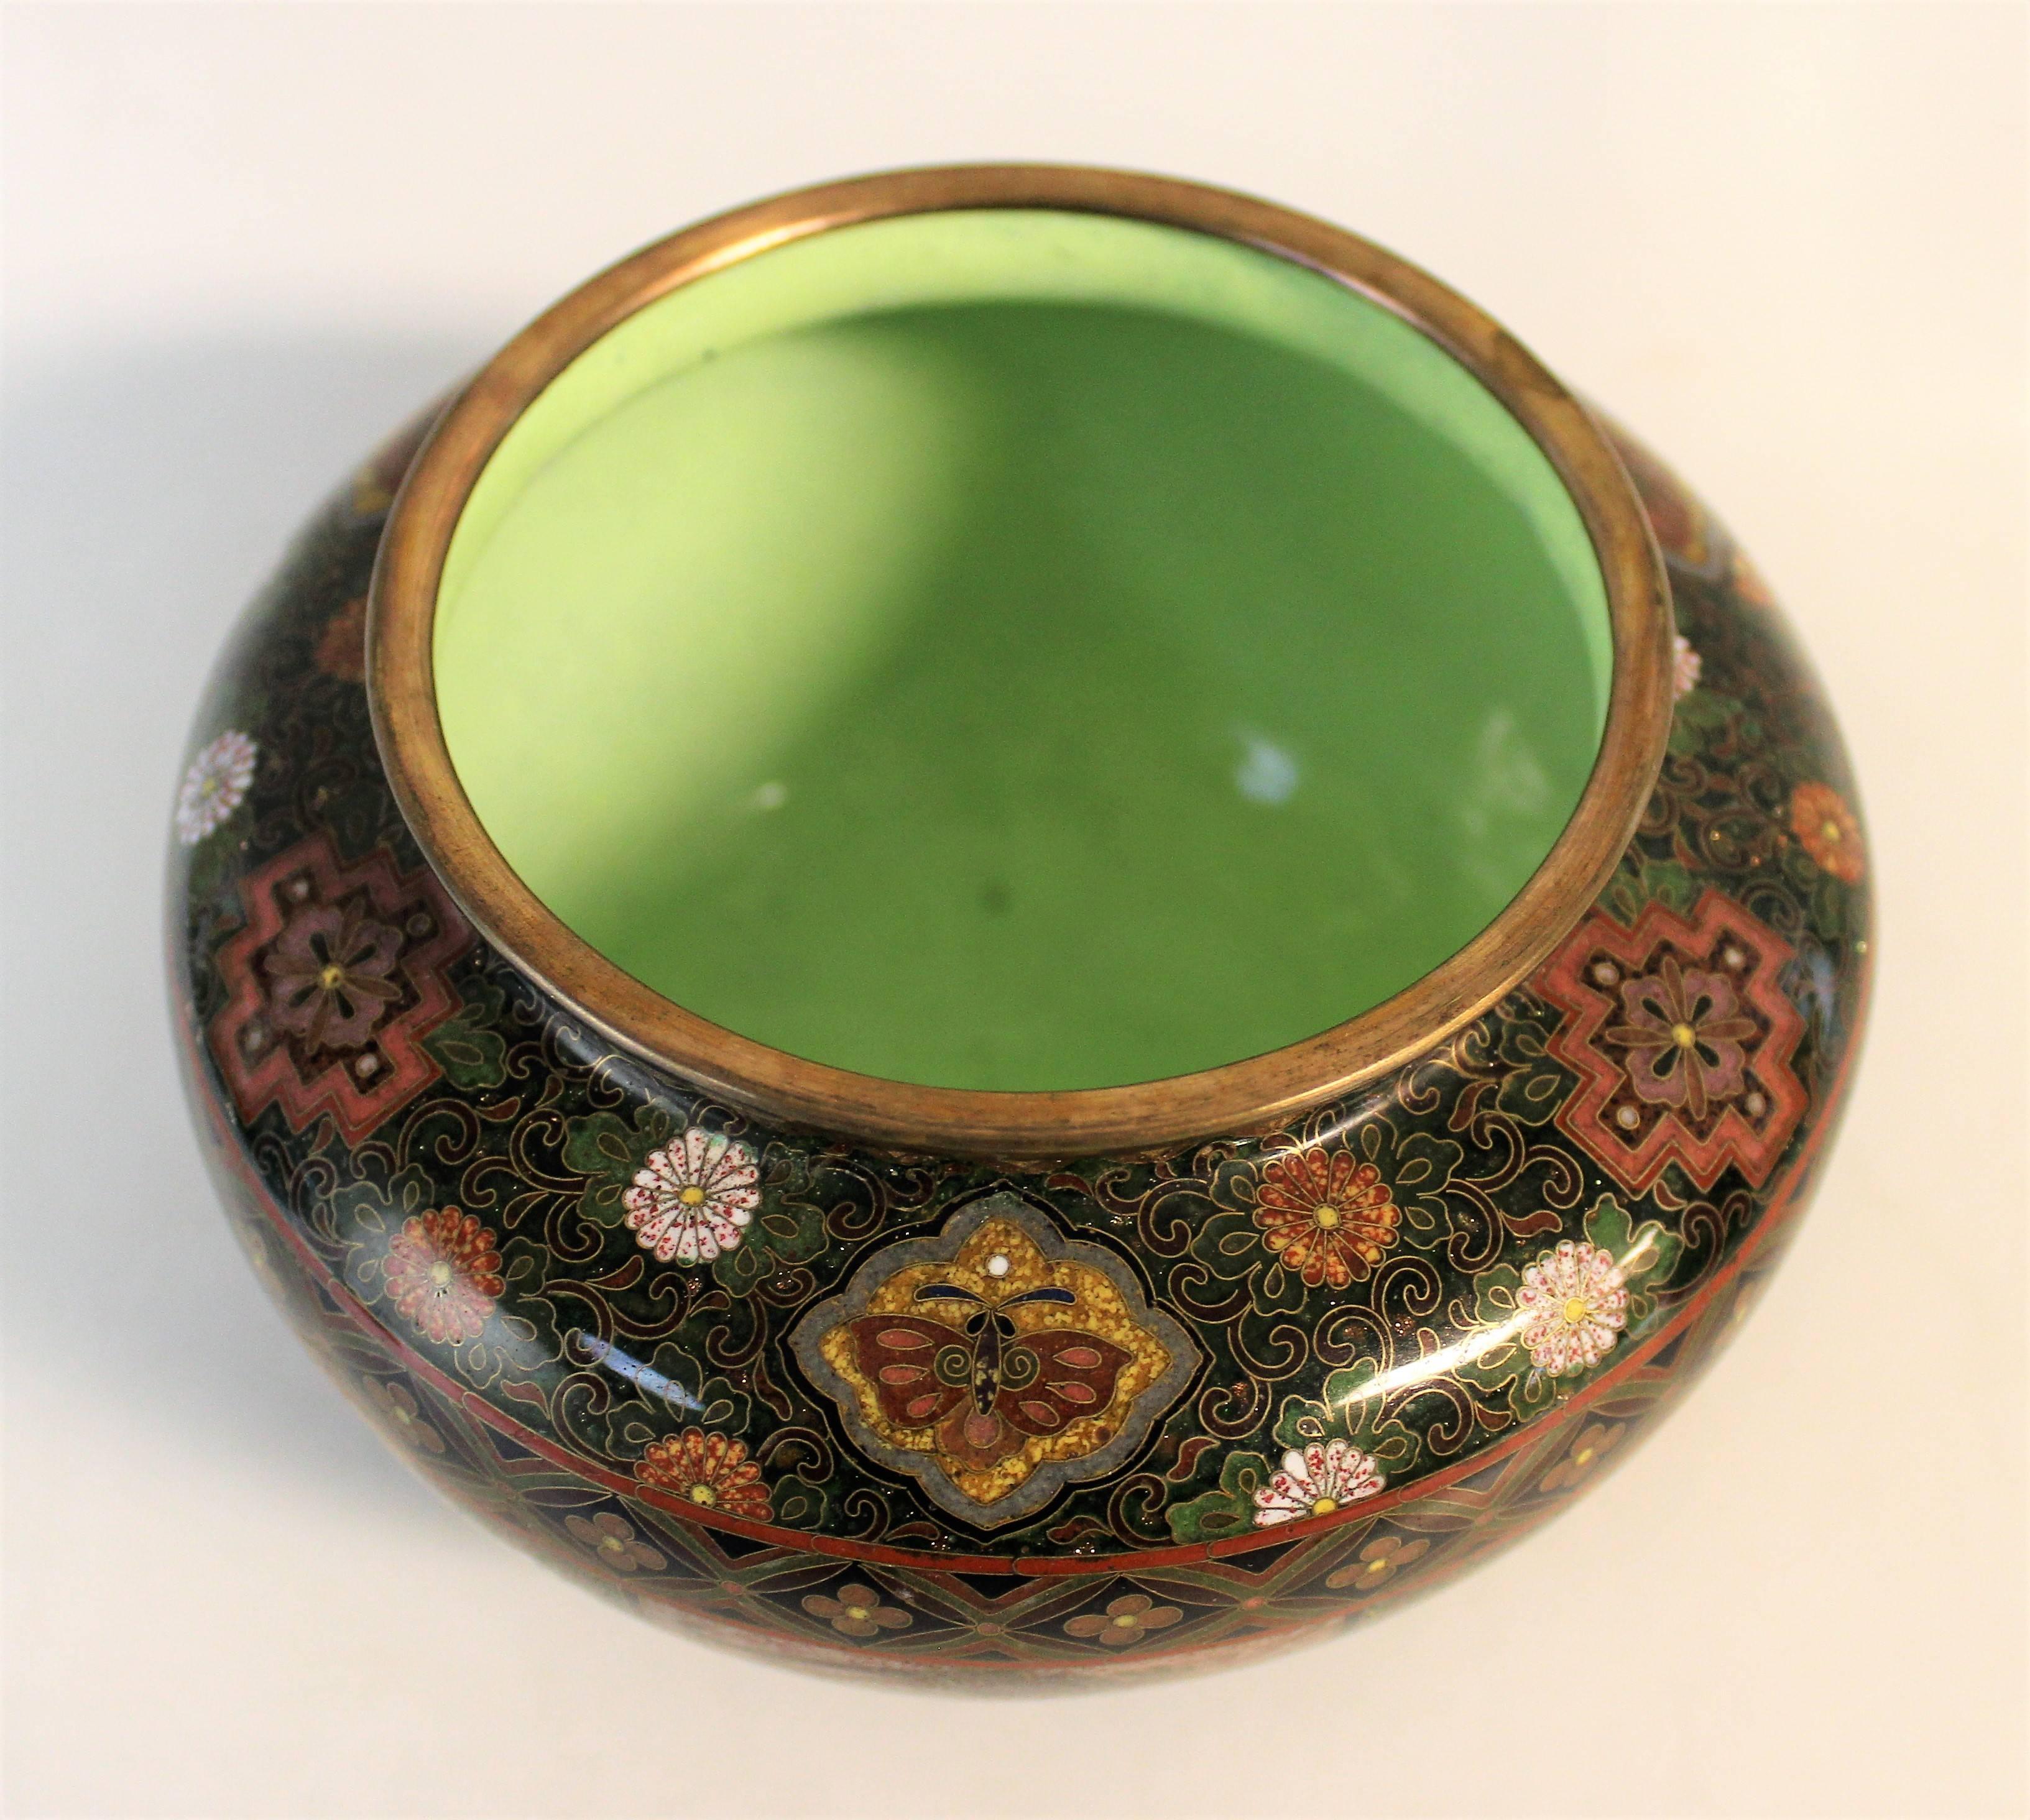 Japanese Meiji Period Cloisonne Bowl In Good Condition For Sale In Hamilton, Ontario